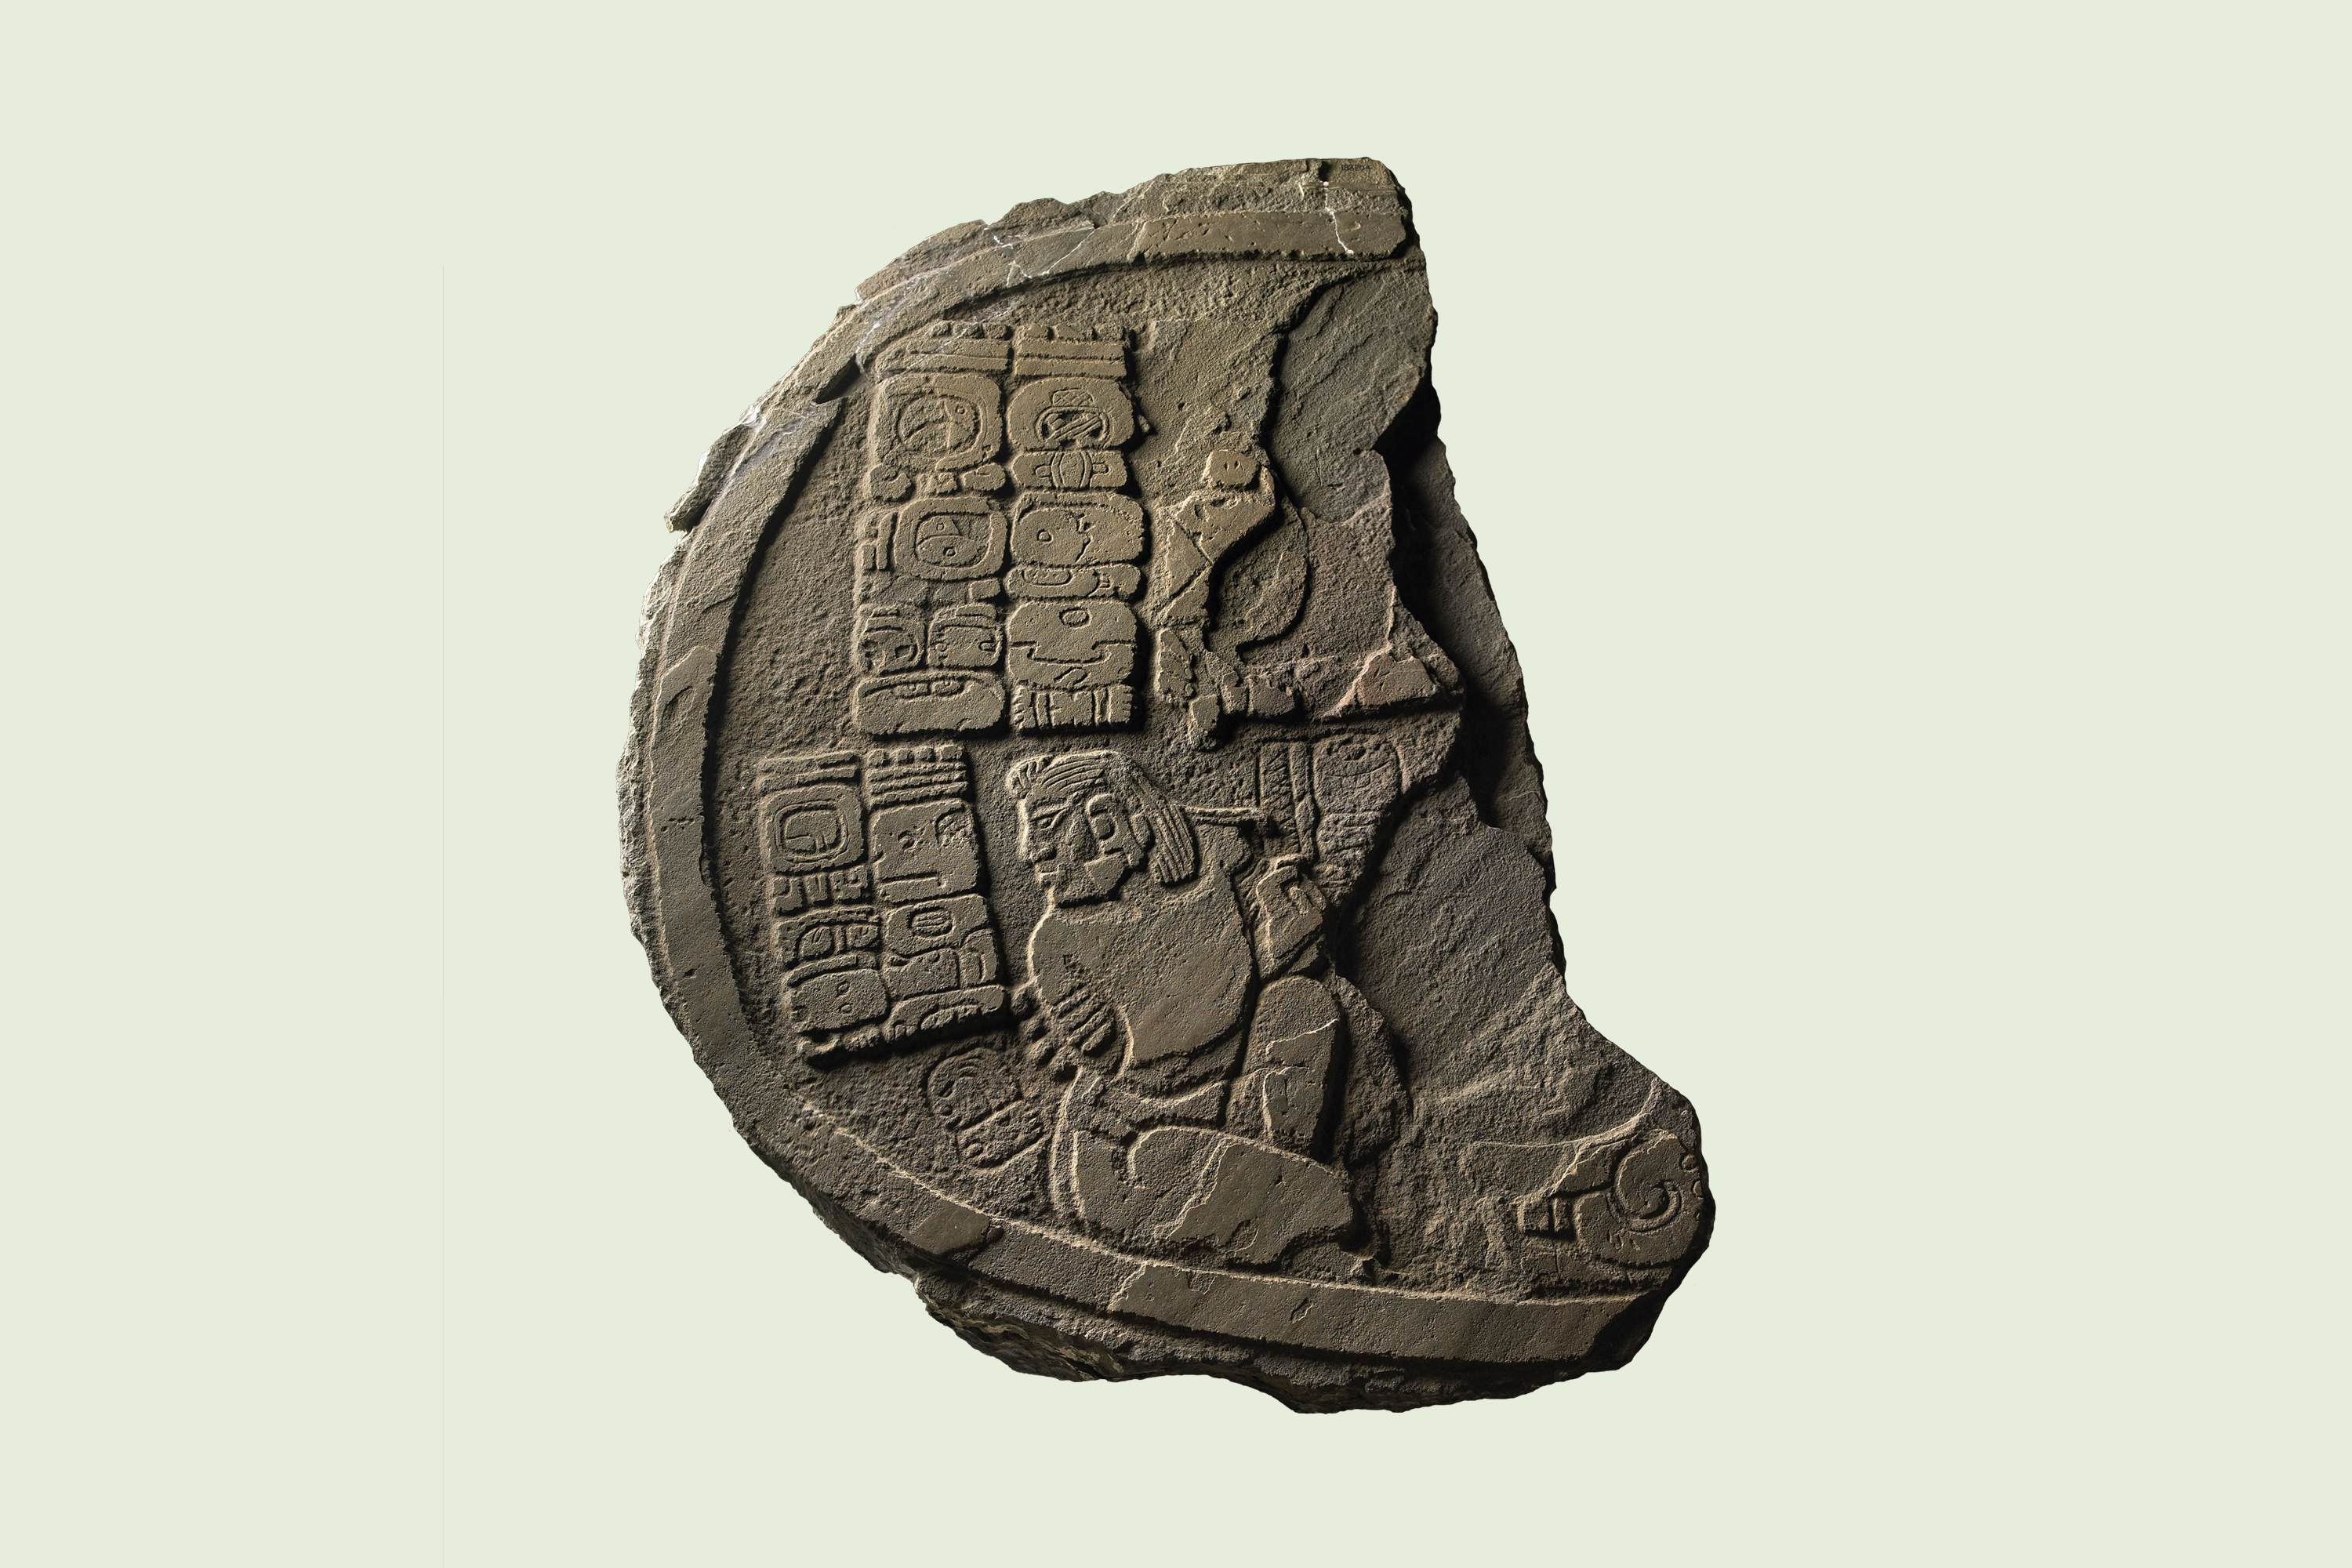 We have learned a lot about the history of the Maya—one of the most well-known early American societies—from intricate carved stones that include calendric information created by early Mesoamericans.